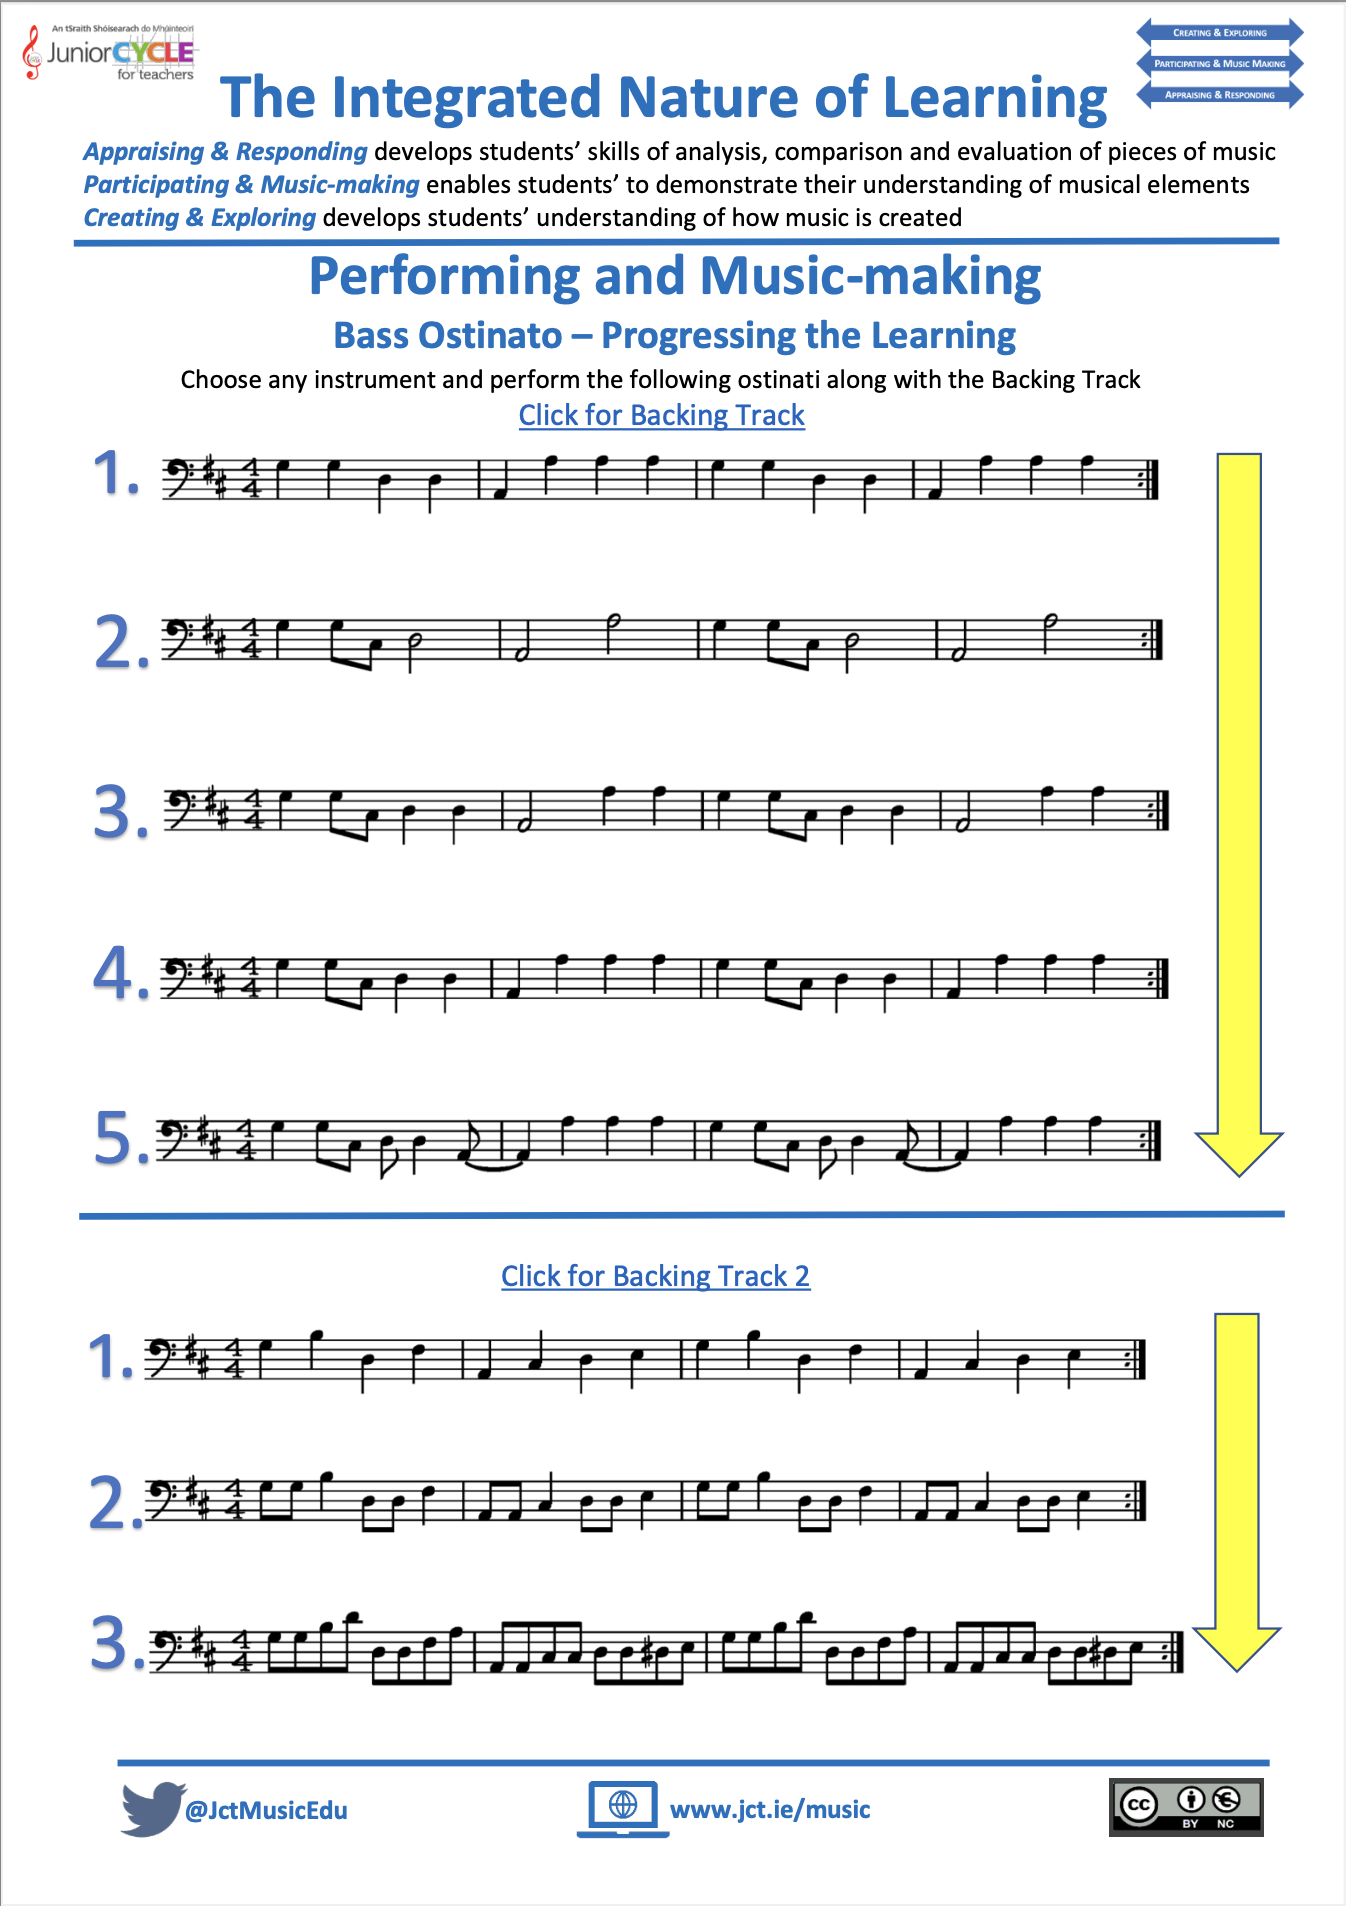 The Integrated Nature of Learning: Participating and Music-Making Bass Ostinato